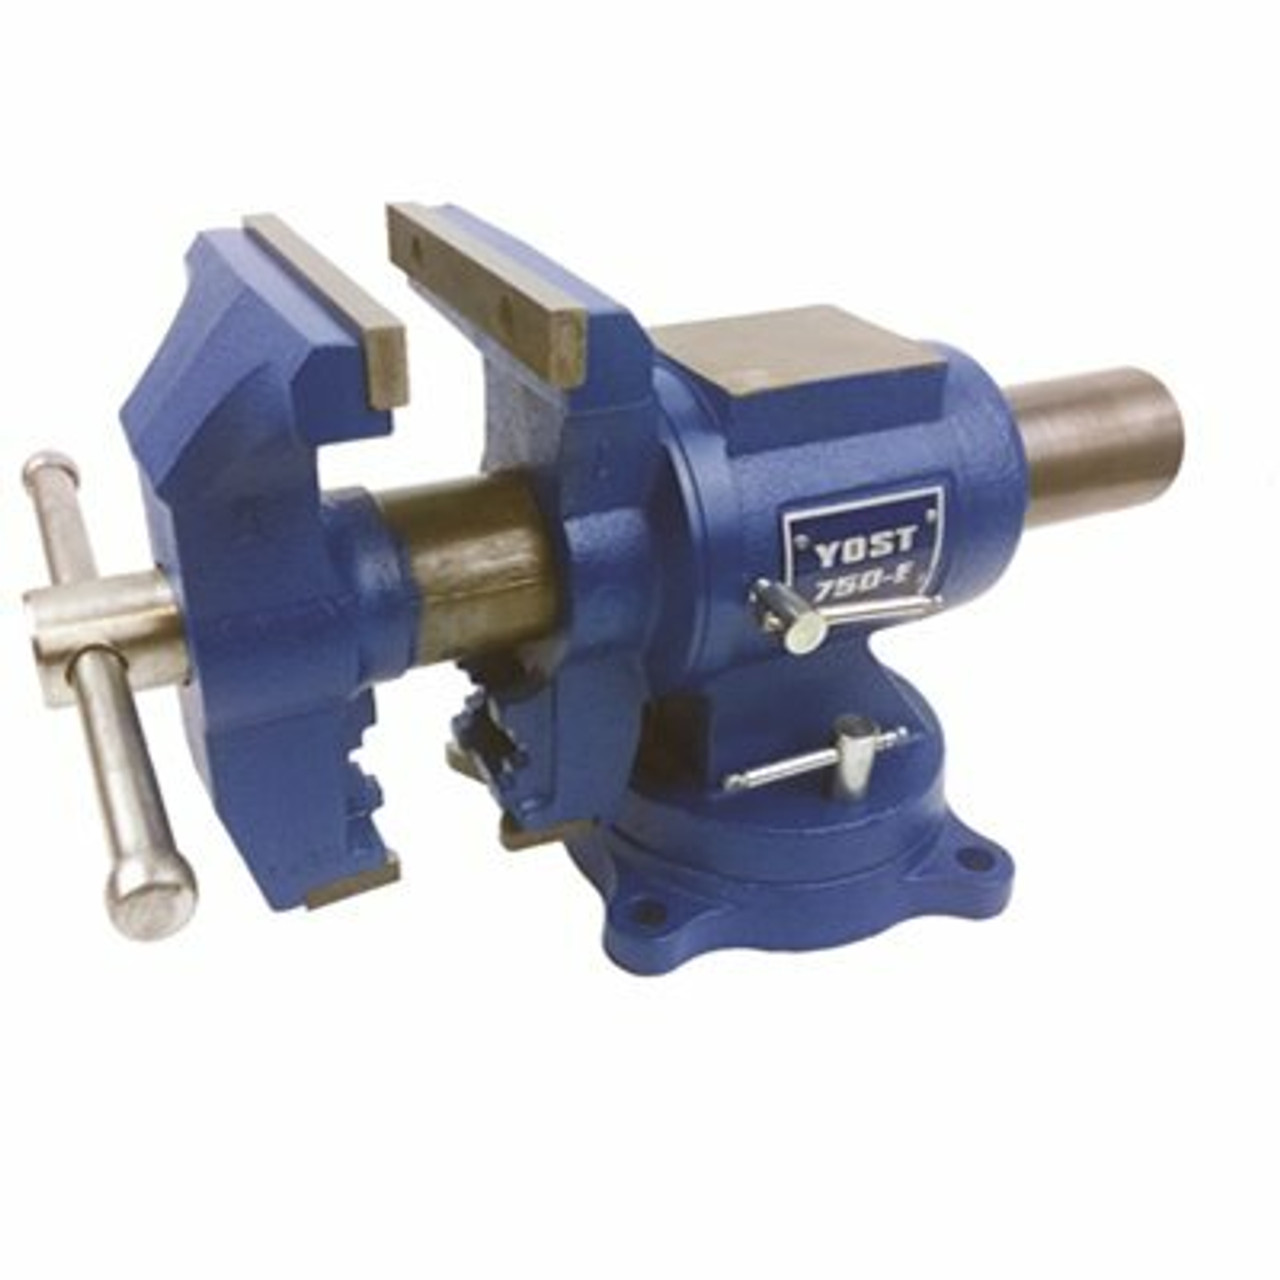 Yost 4-7/8 In. Rotating Vise